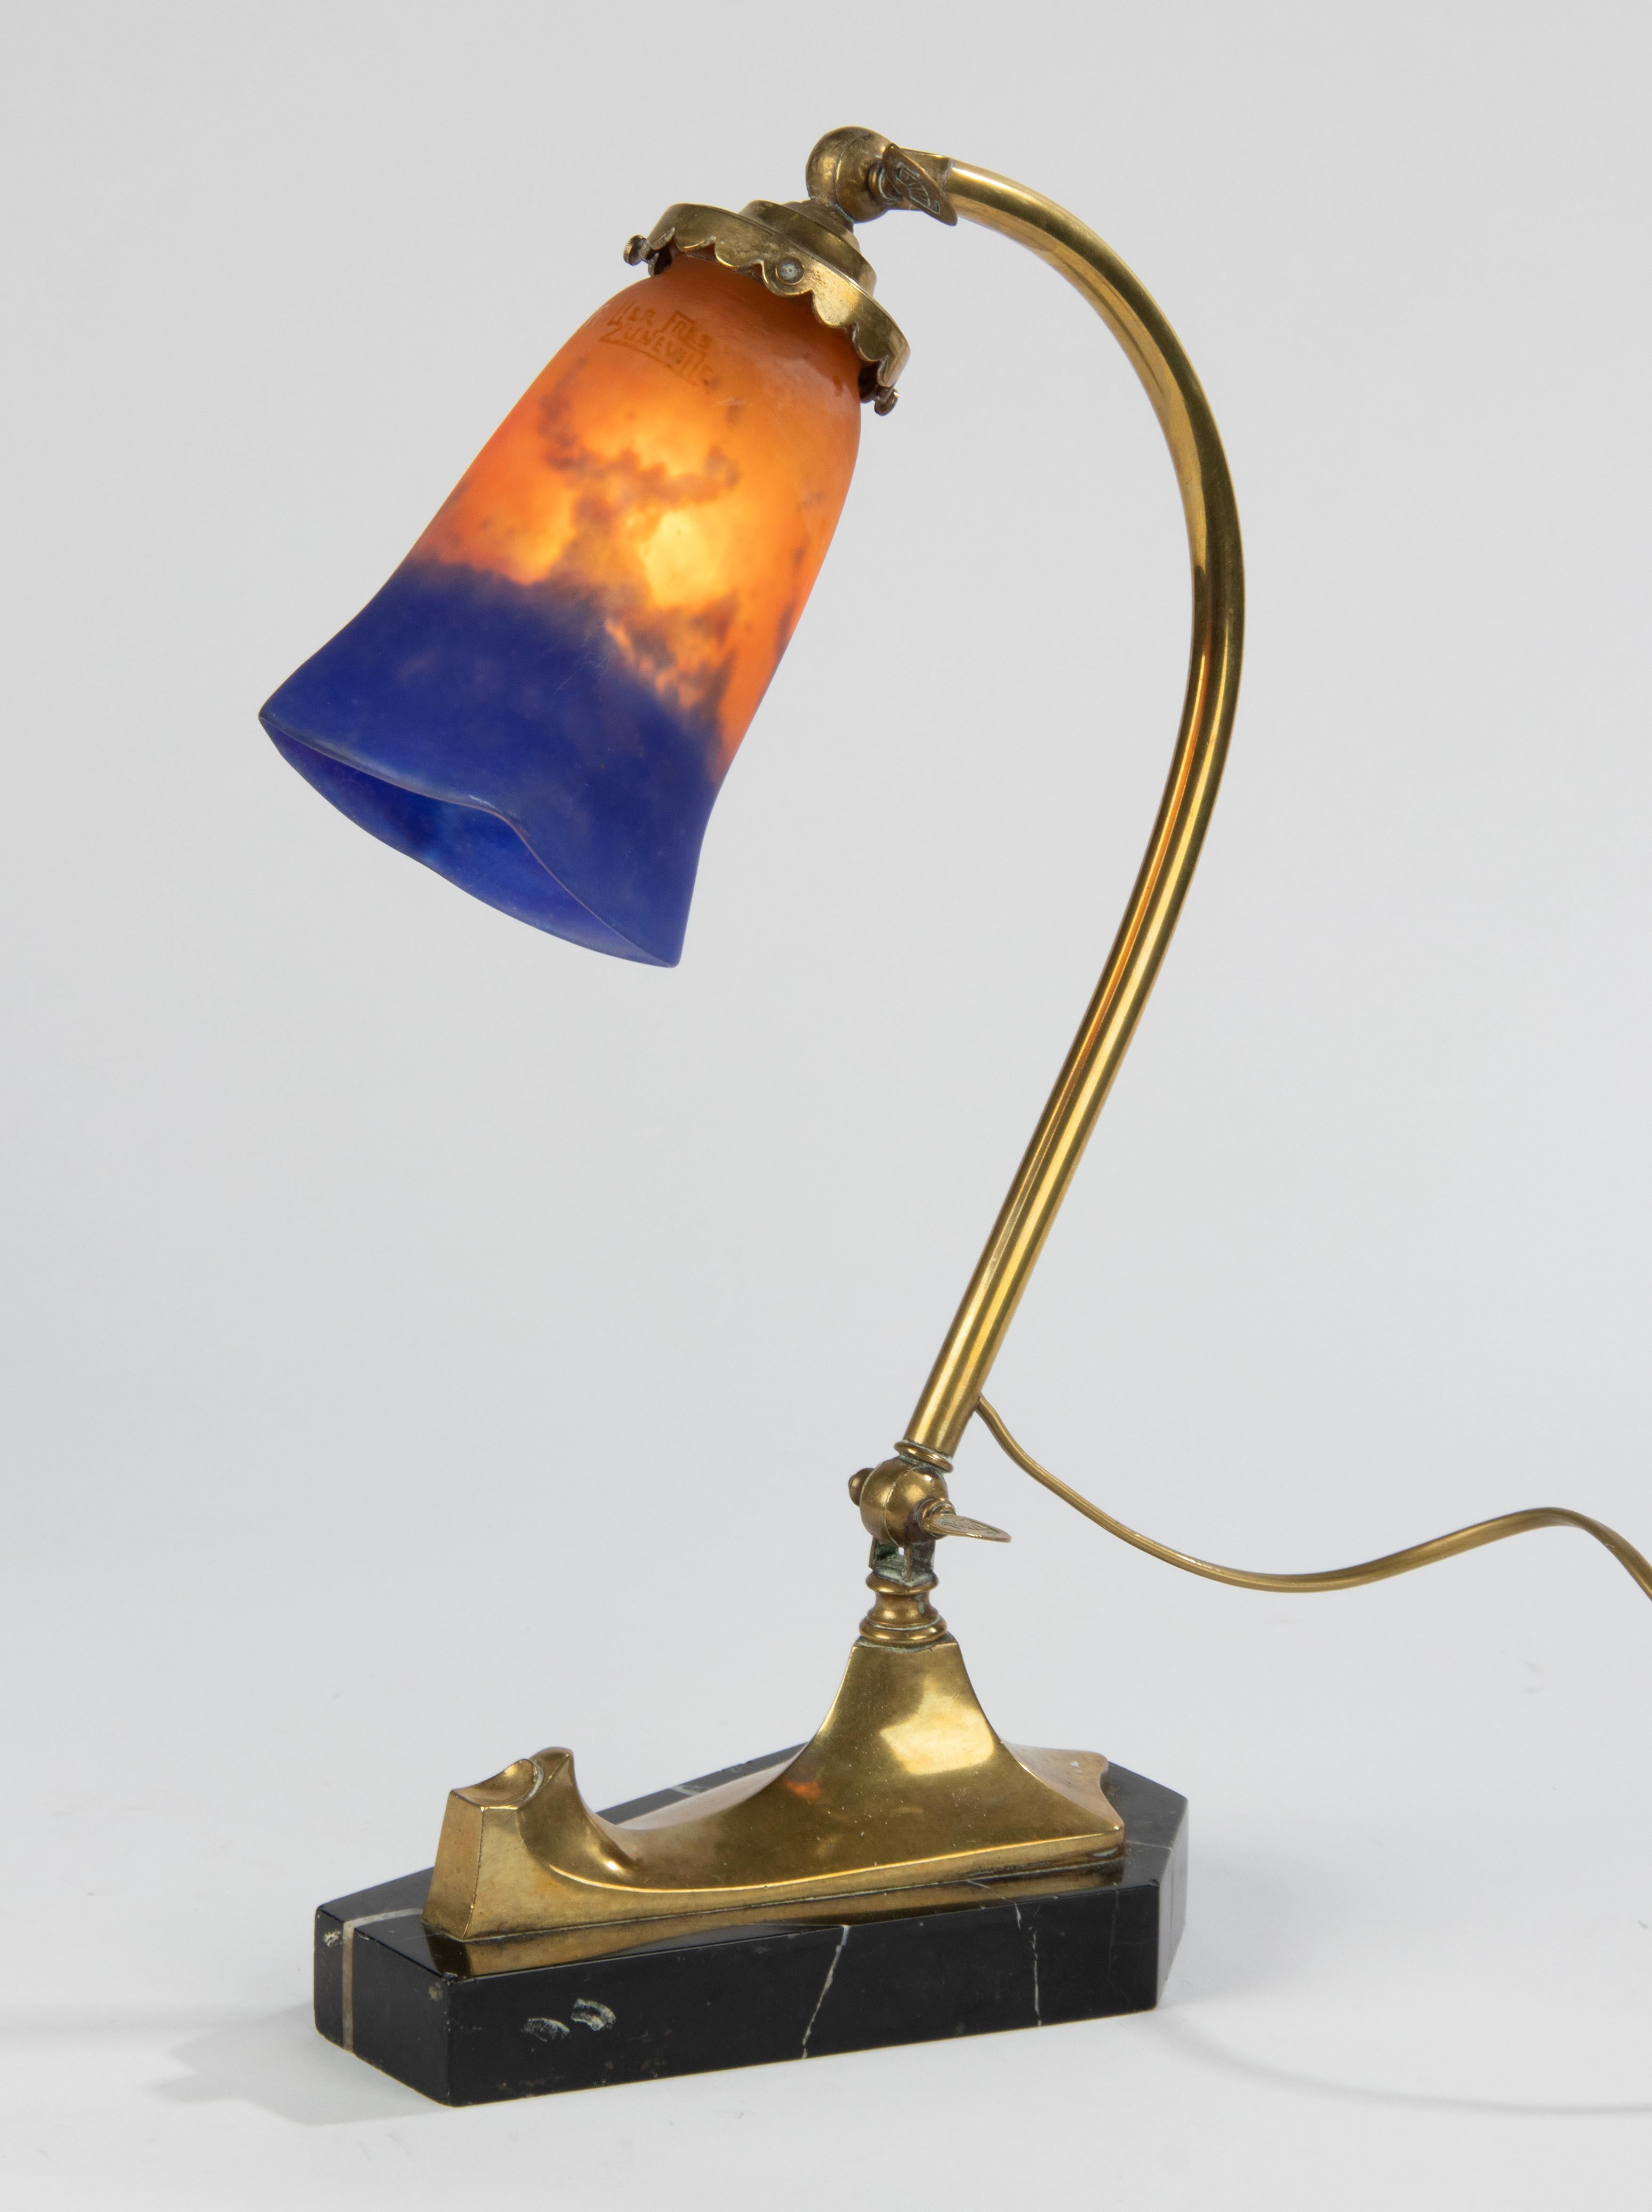 An elegant table lamp or desk lamp, made of brass on a marble plinth. The lampshade is made of pasta glass, also called 